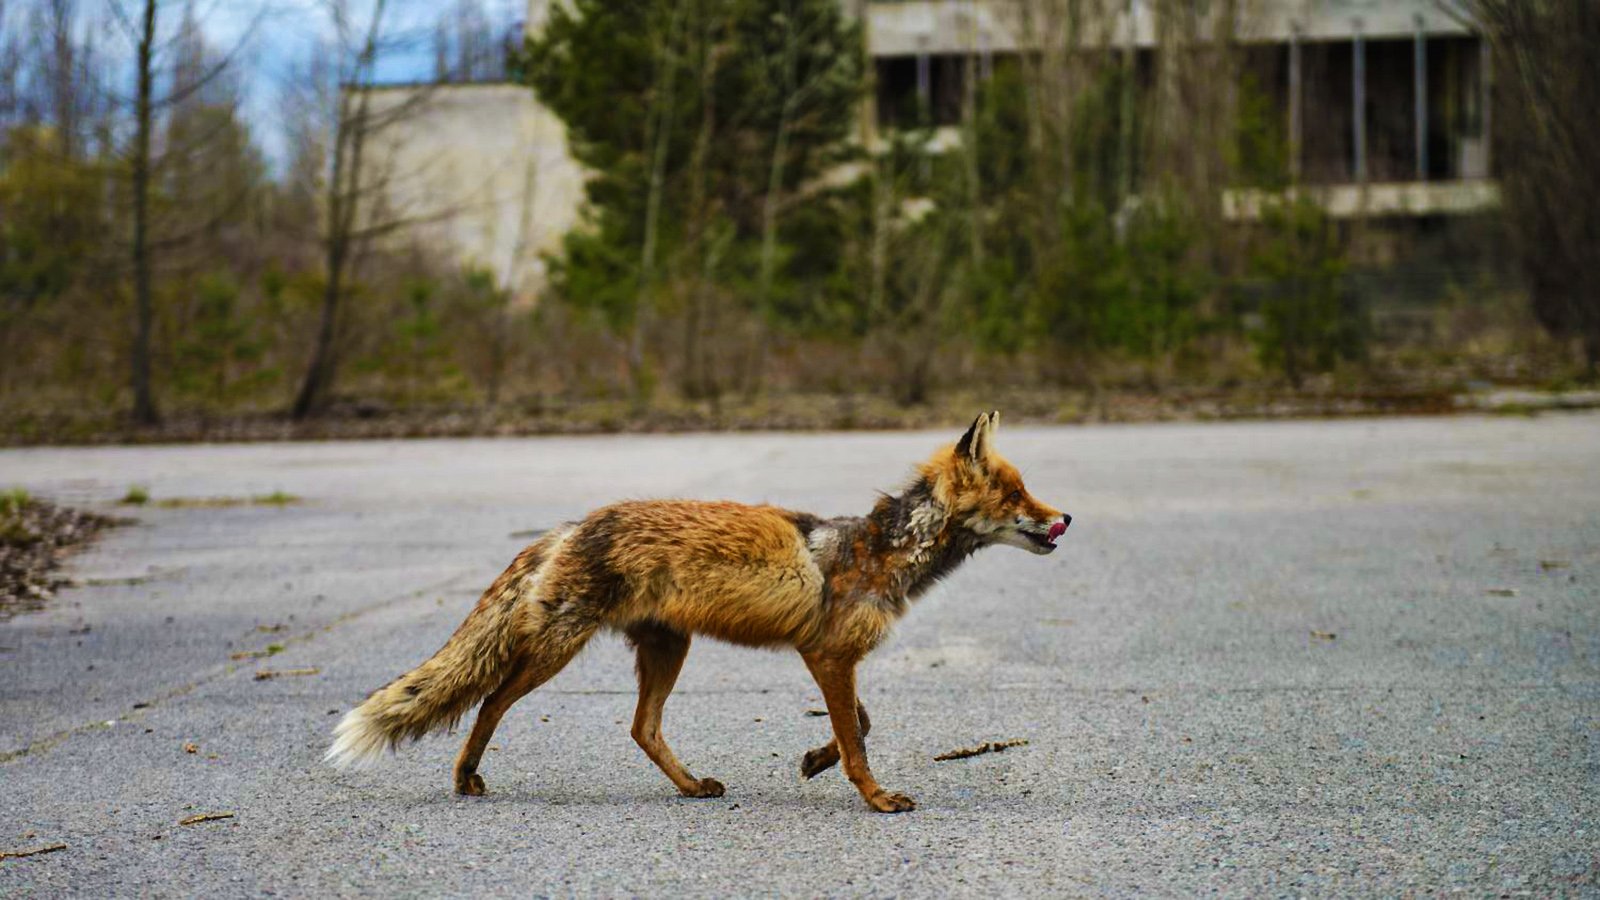 How to see animals living in the ghost town in Chernobyl